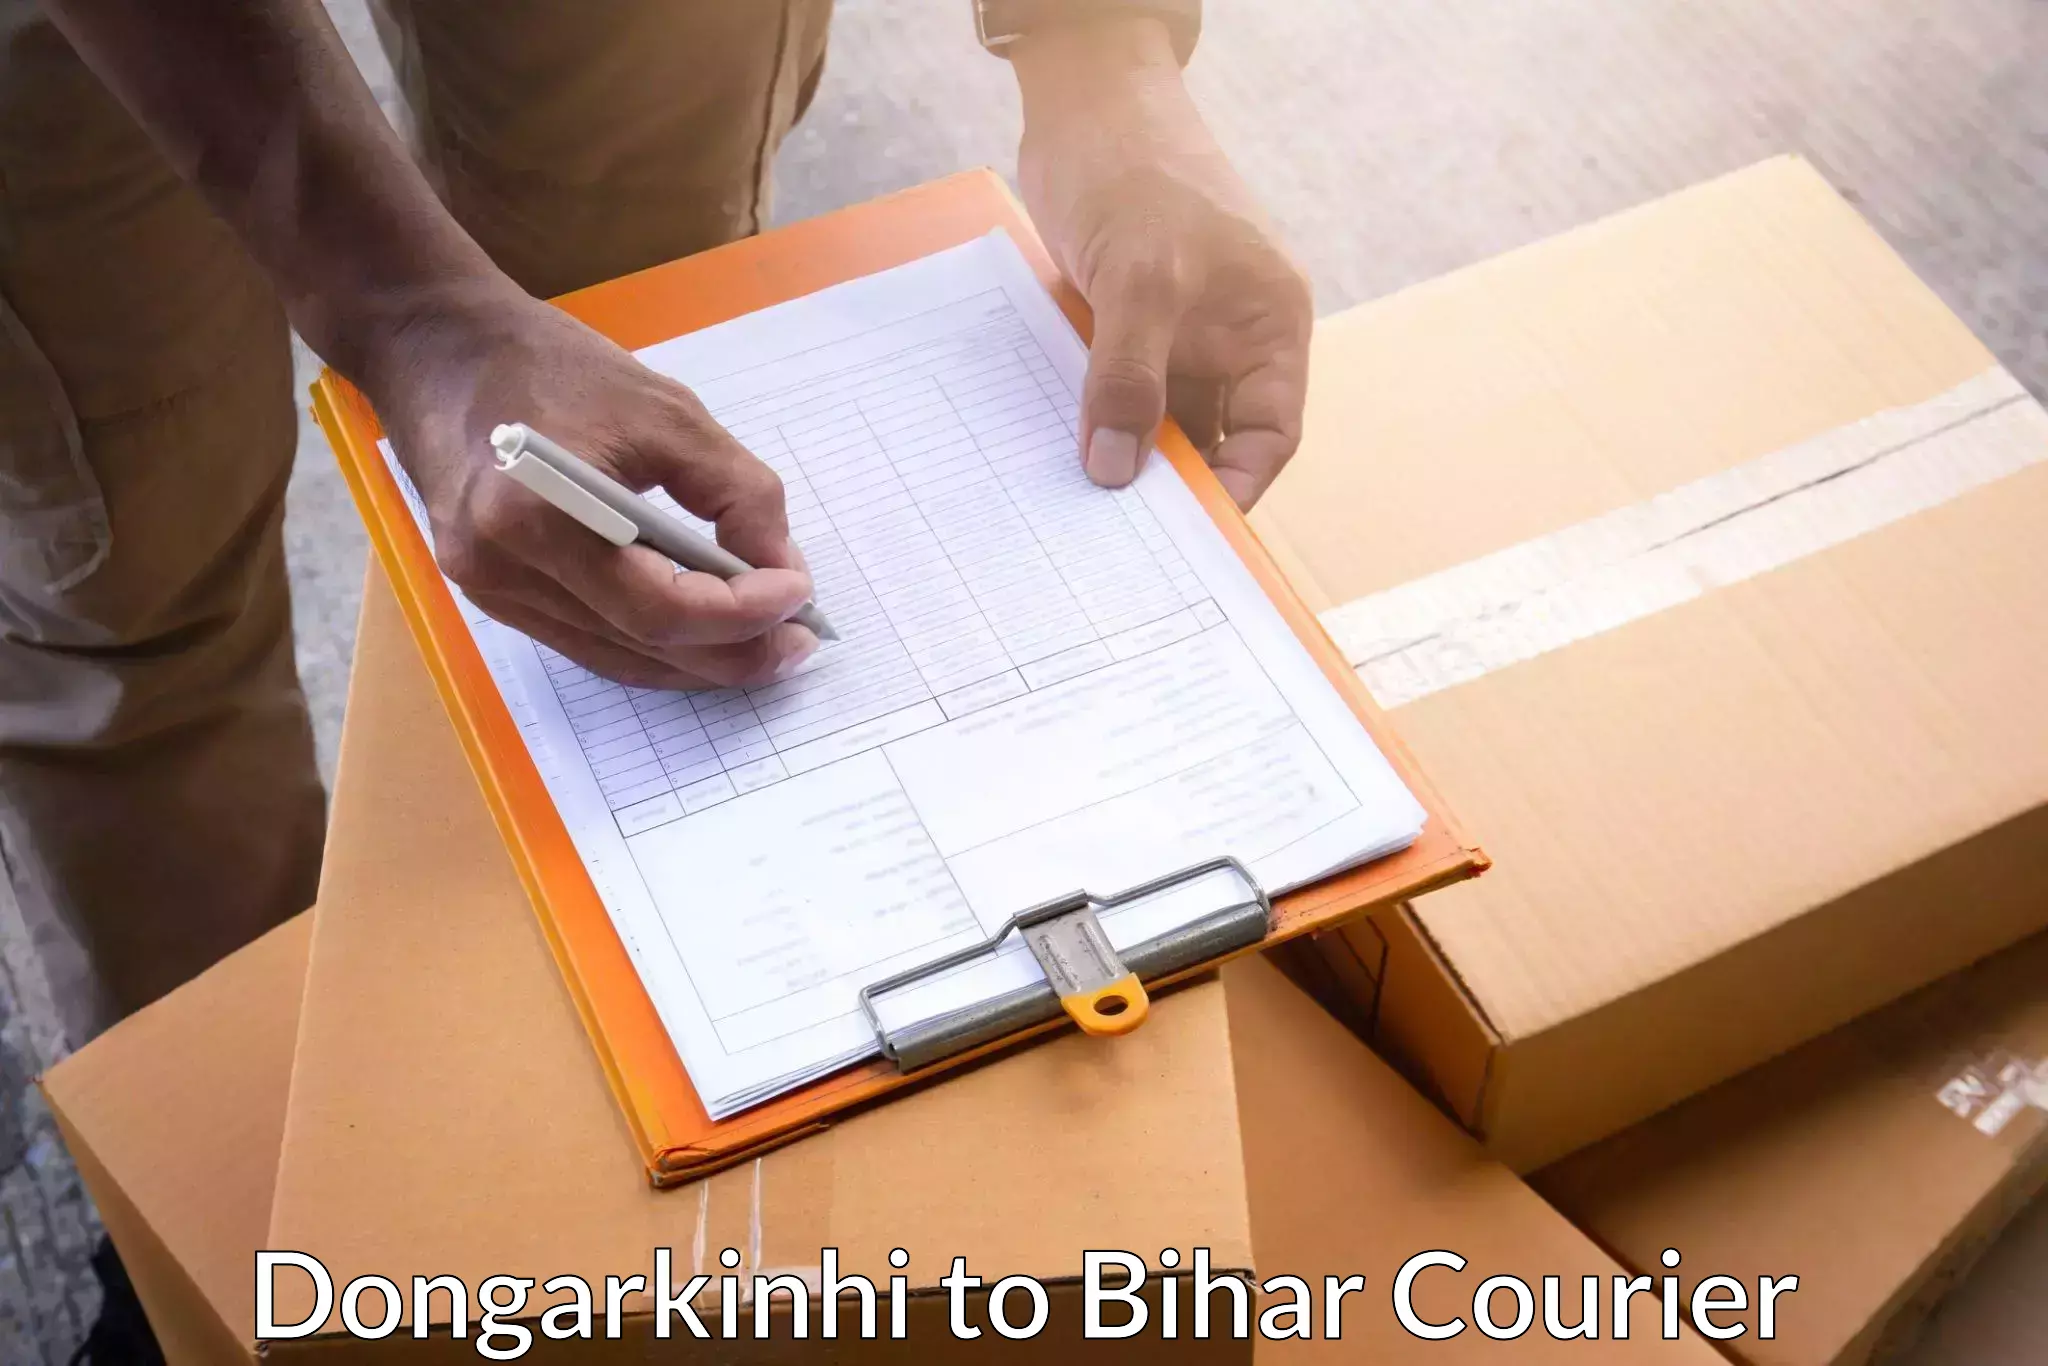 Rapid freight solutions Dongarkinhi to Buxar